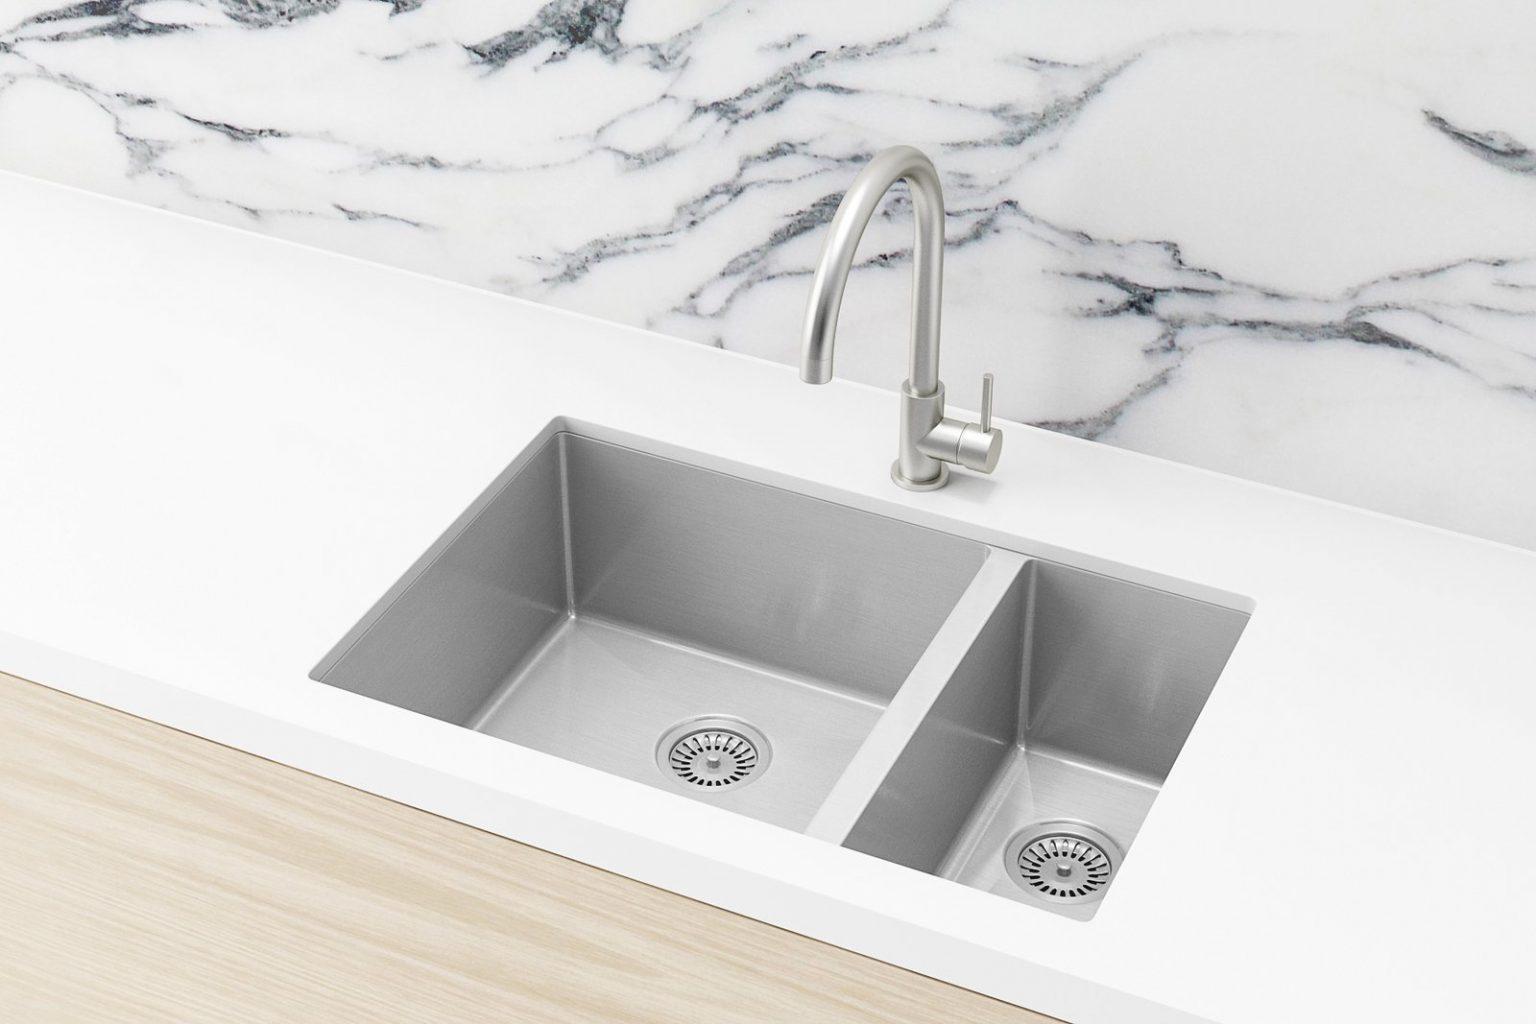 kopais commercial brushed nickel kitchen sink fauce